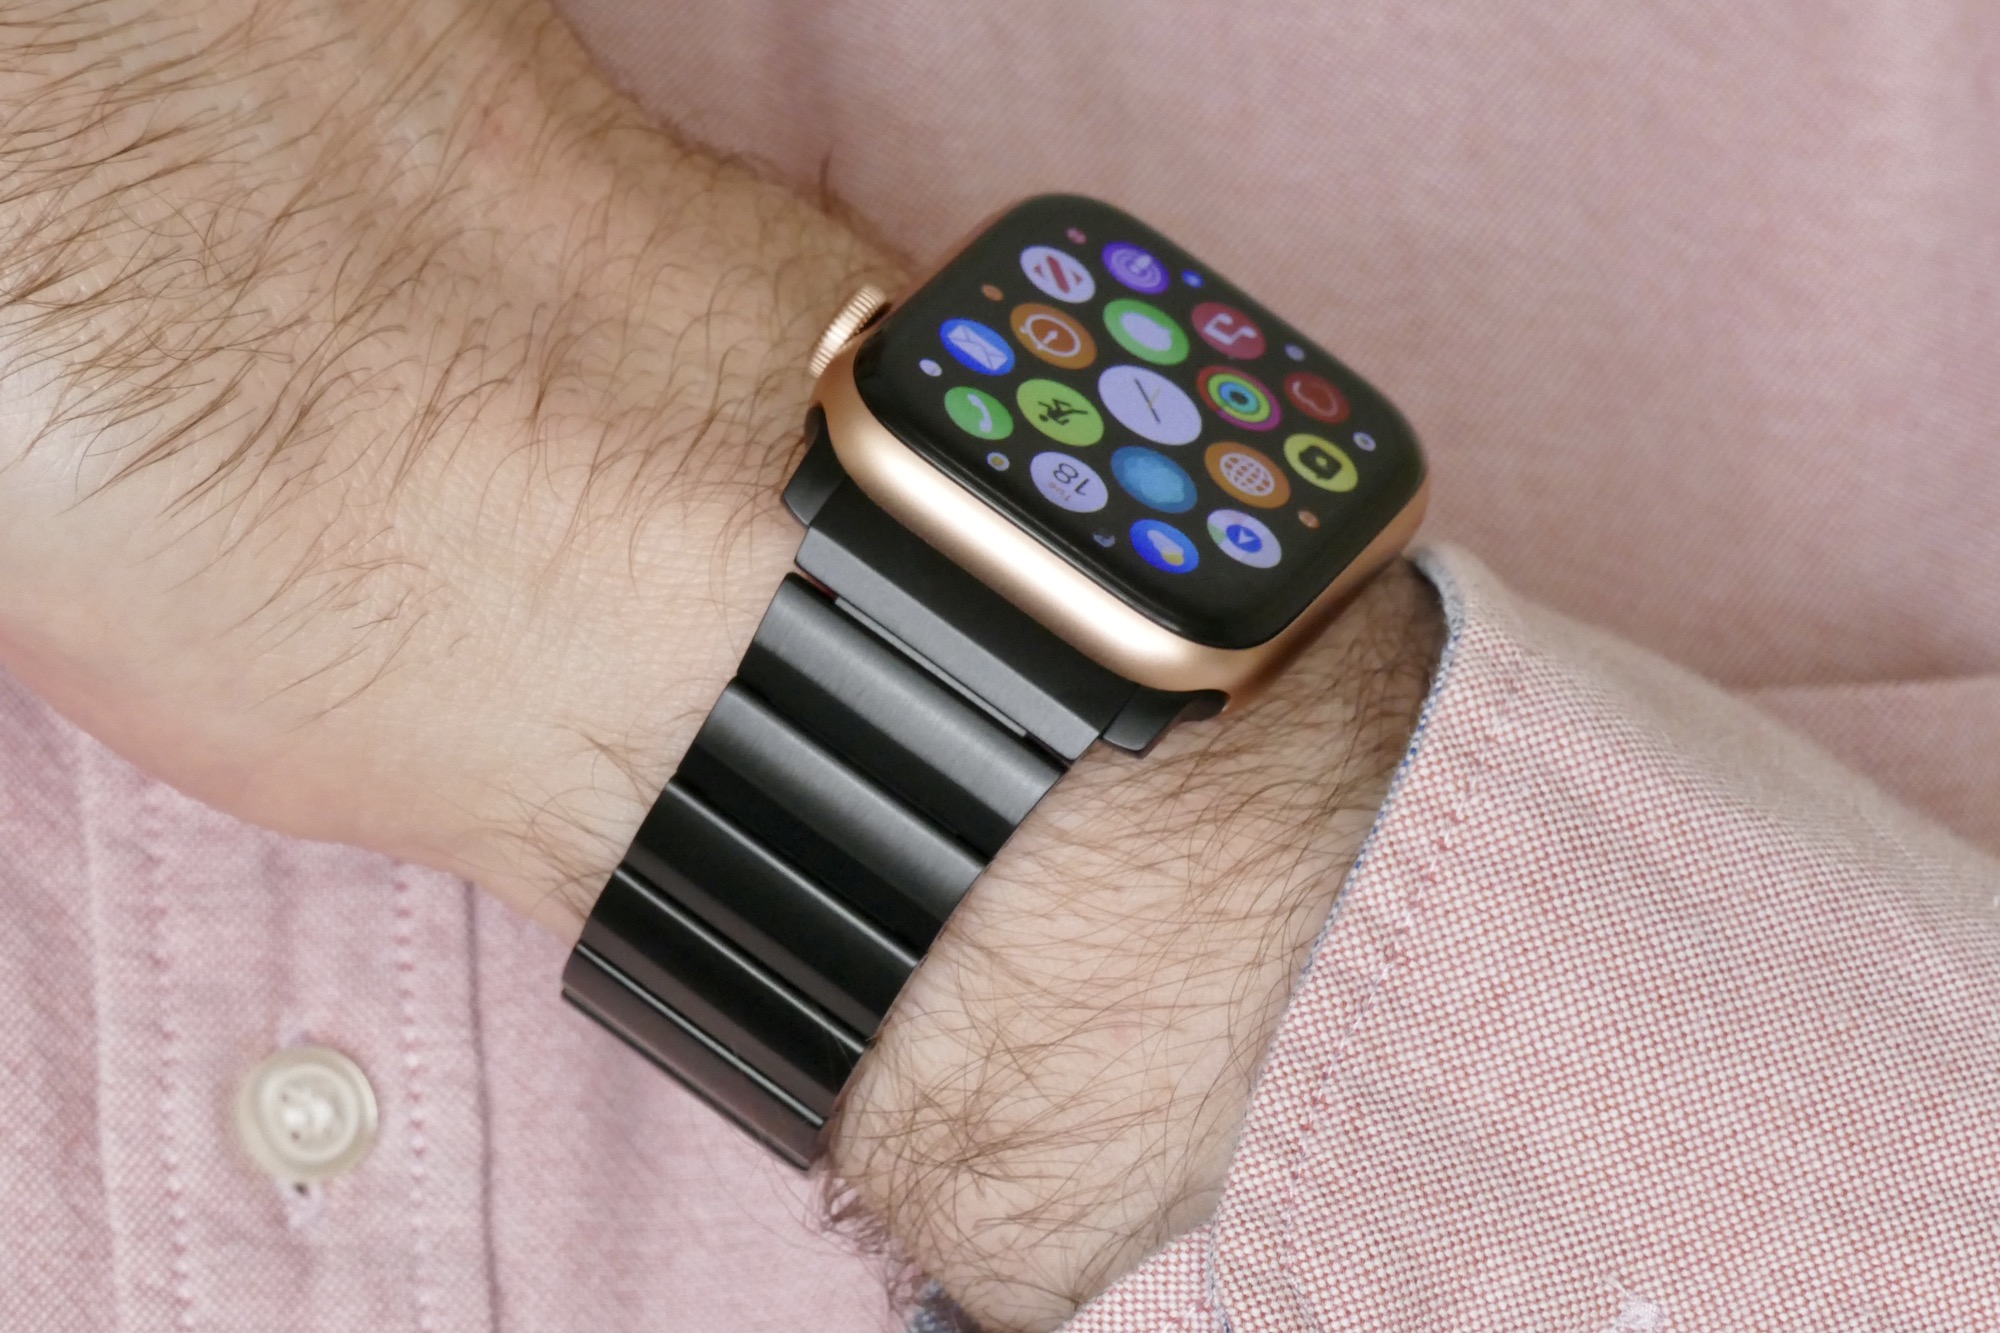 nomad titanium steel band apple watch hands on photos price release date se gold wrist side